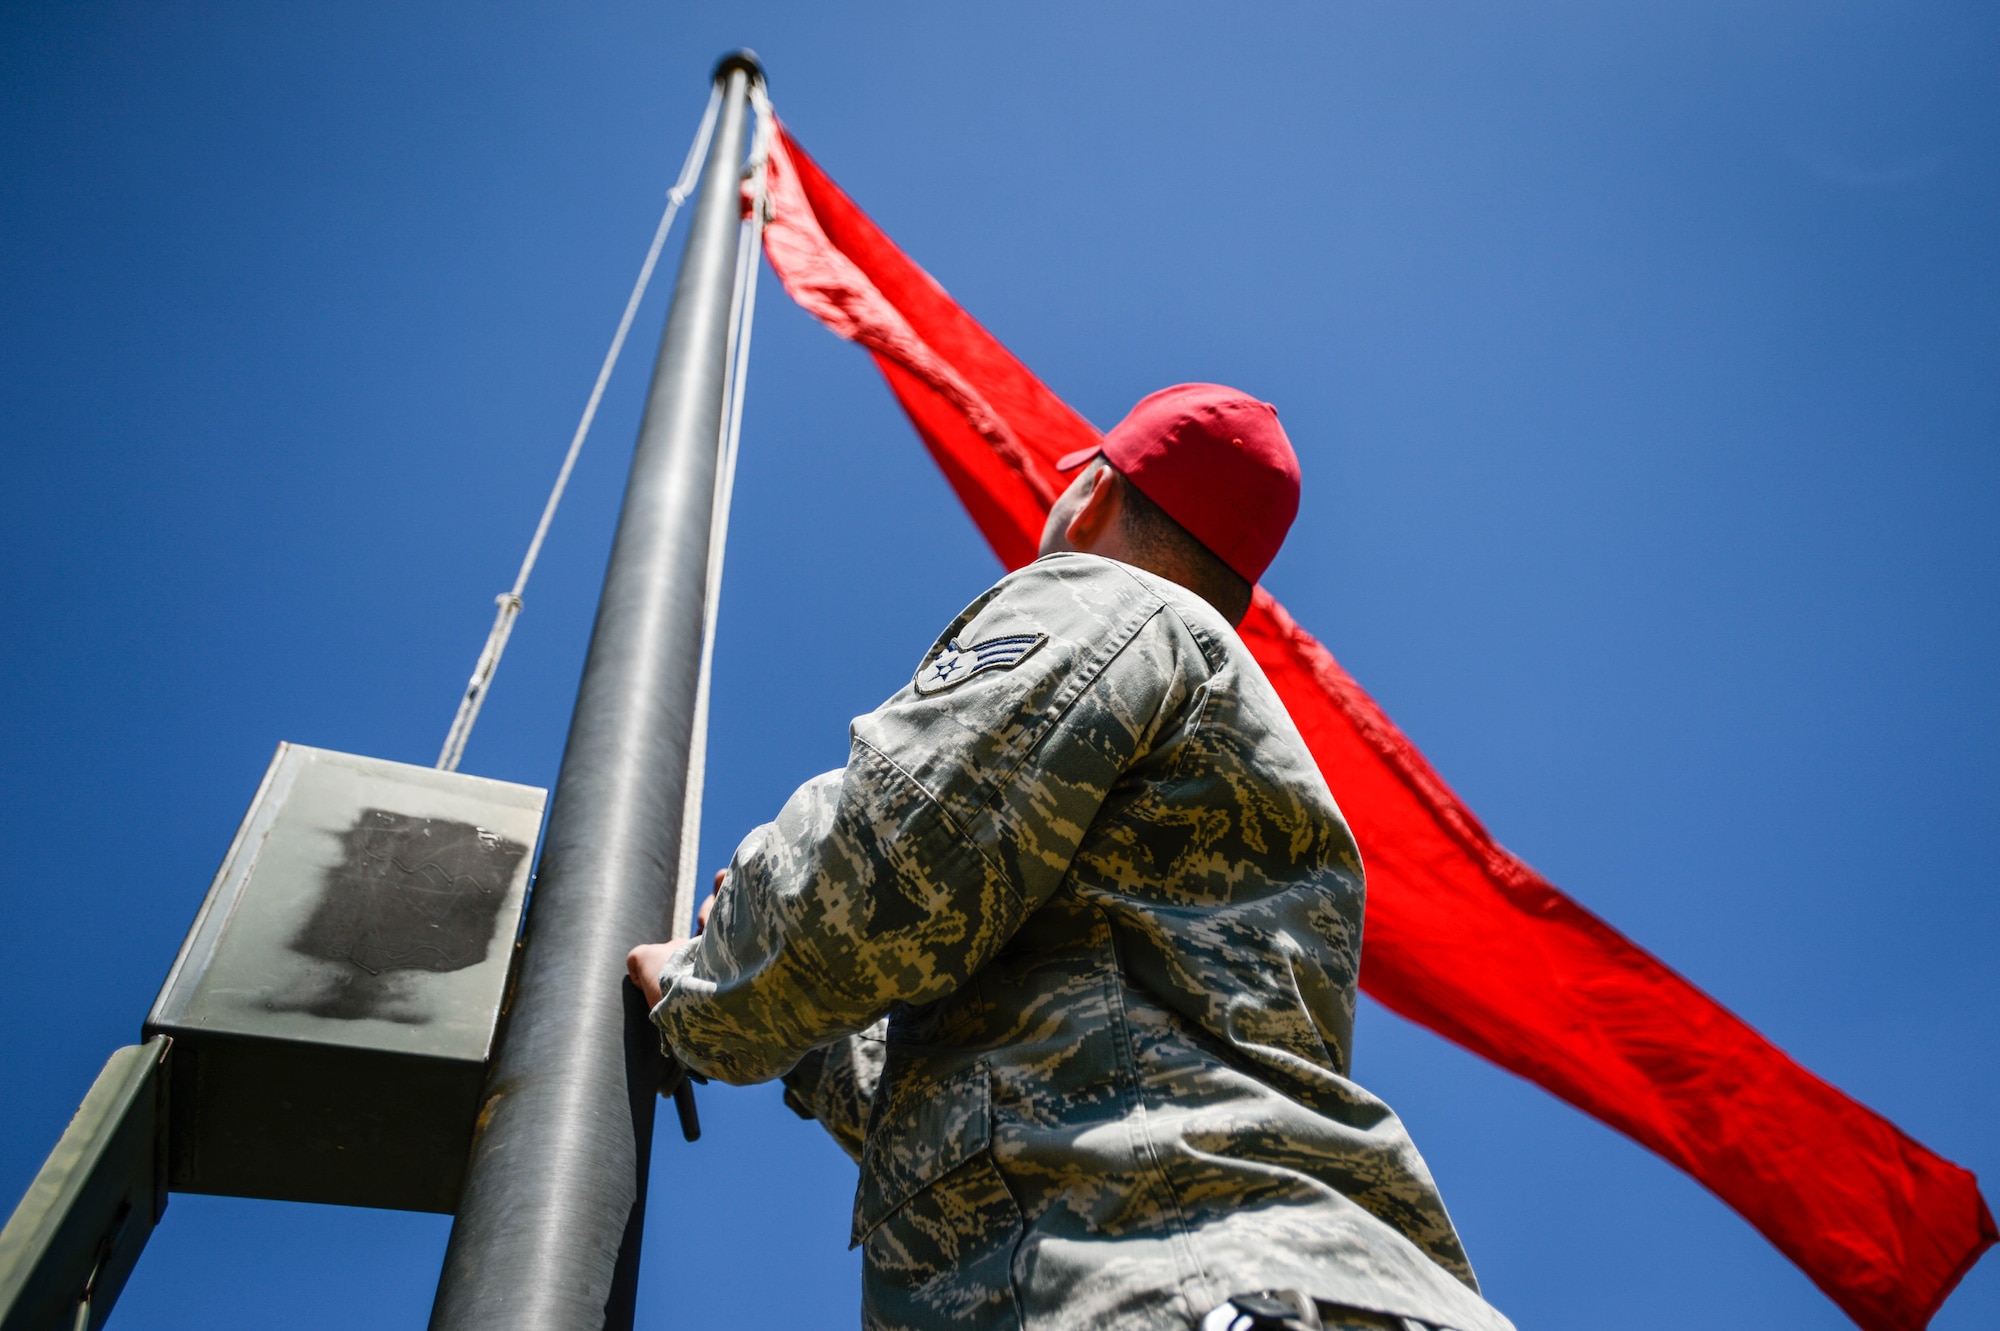 U.S. Air Force Staff Sgt. Jason Mufford, 20th Security Forces Squadron combat arms instructor, raises a flag signaling “live fire” at Shaw Air Force Base, S.C., March 08, 2016. The red flag lets the base populace know when Team Shaw members are firing weapons at the combat arms range. (U.S. Air Force photo by Senior Airman Jensen Stidham)